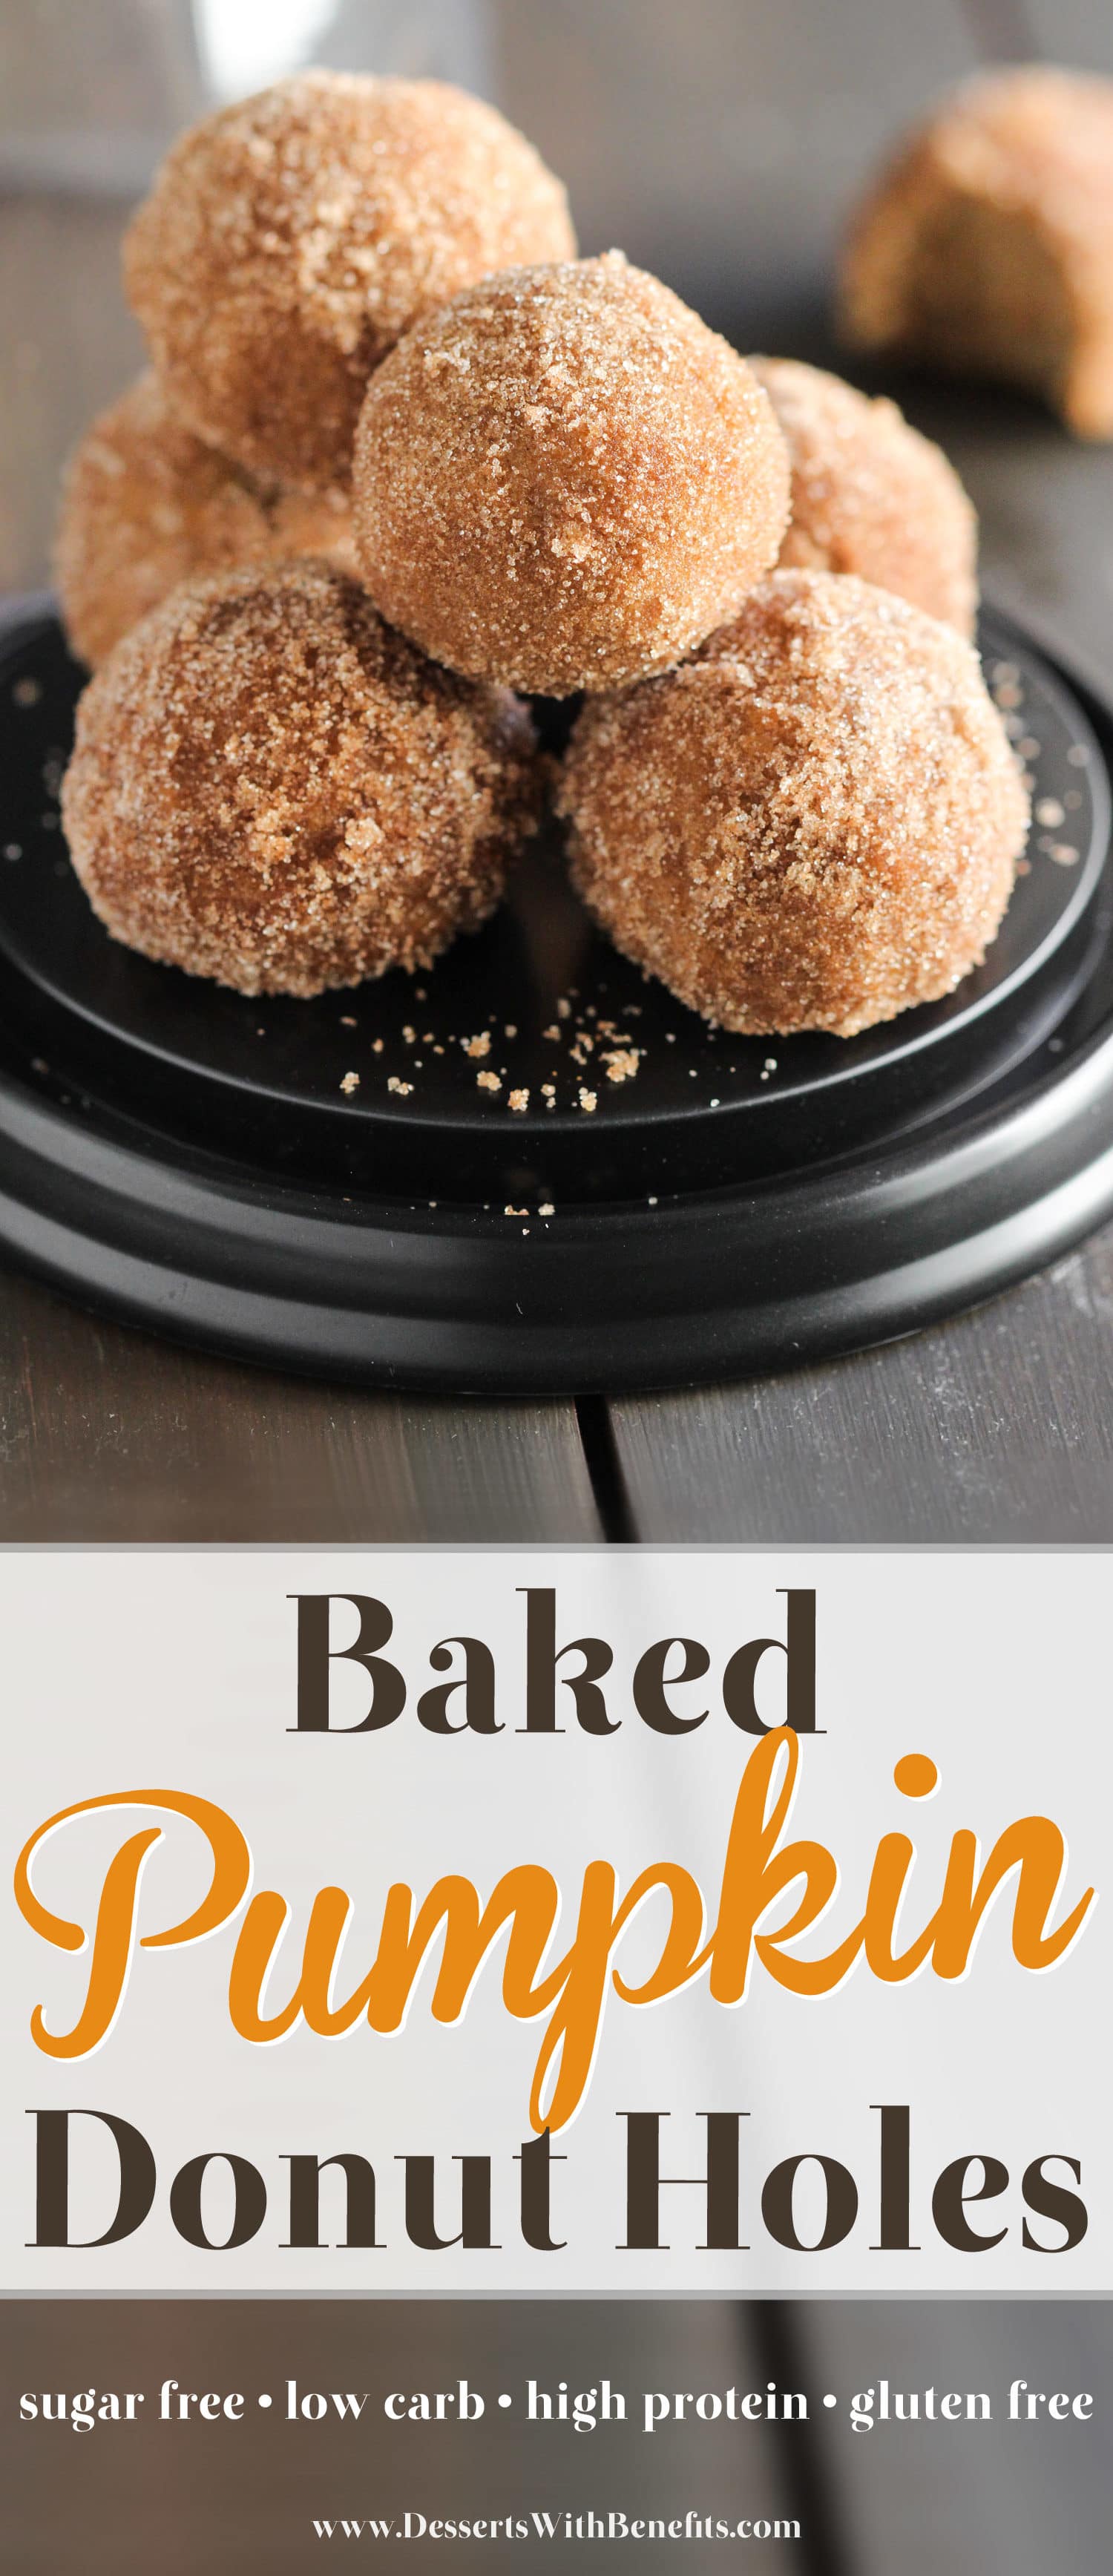 Healthy Baked Pumpkin Donut Holes! You'll have a hard time controlling yourself around these. They’re fluffy, sweet, and spiced with cinnamon, ginger, nutmeg, and cloves. Light, filling, and satisfying. You'd never know these are sugar free, low carb, high protein, gluten free, and dairy free too! Healthy Dessert Recipes at Desserts With Benefits (www.DessertsWithBenefits.com)